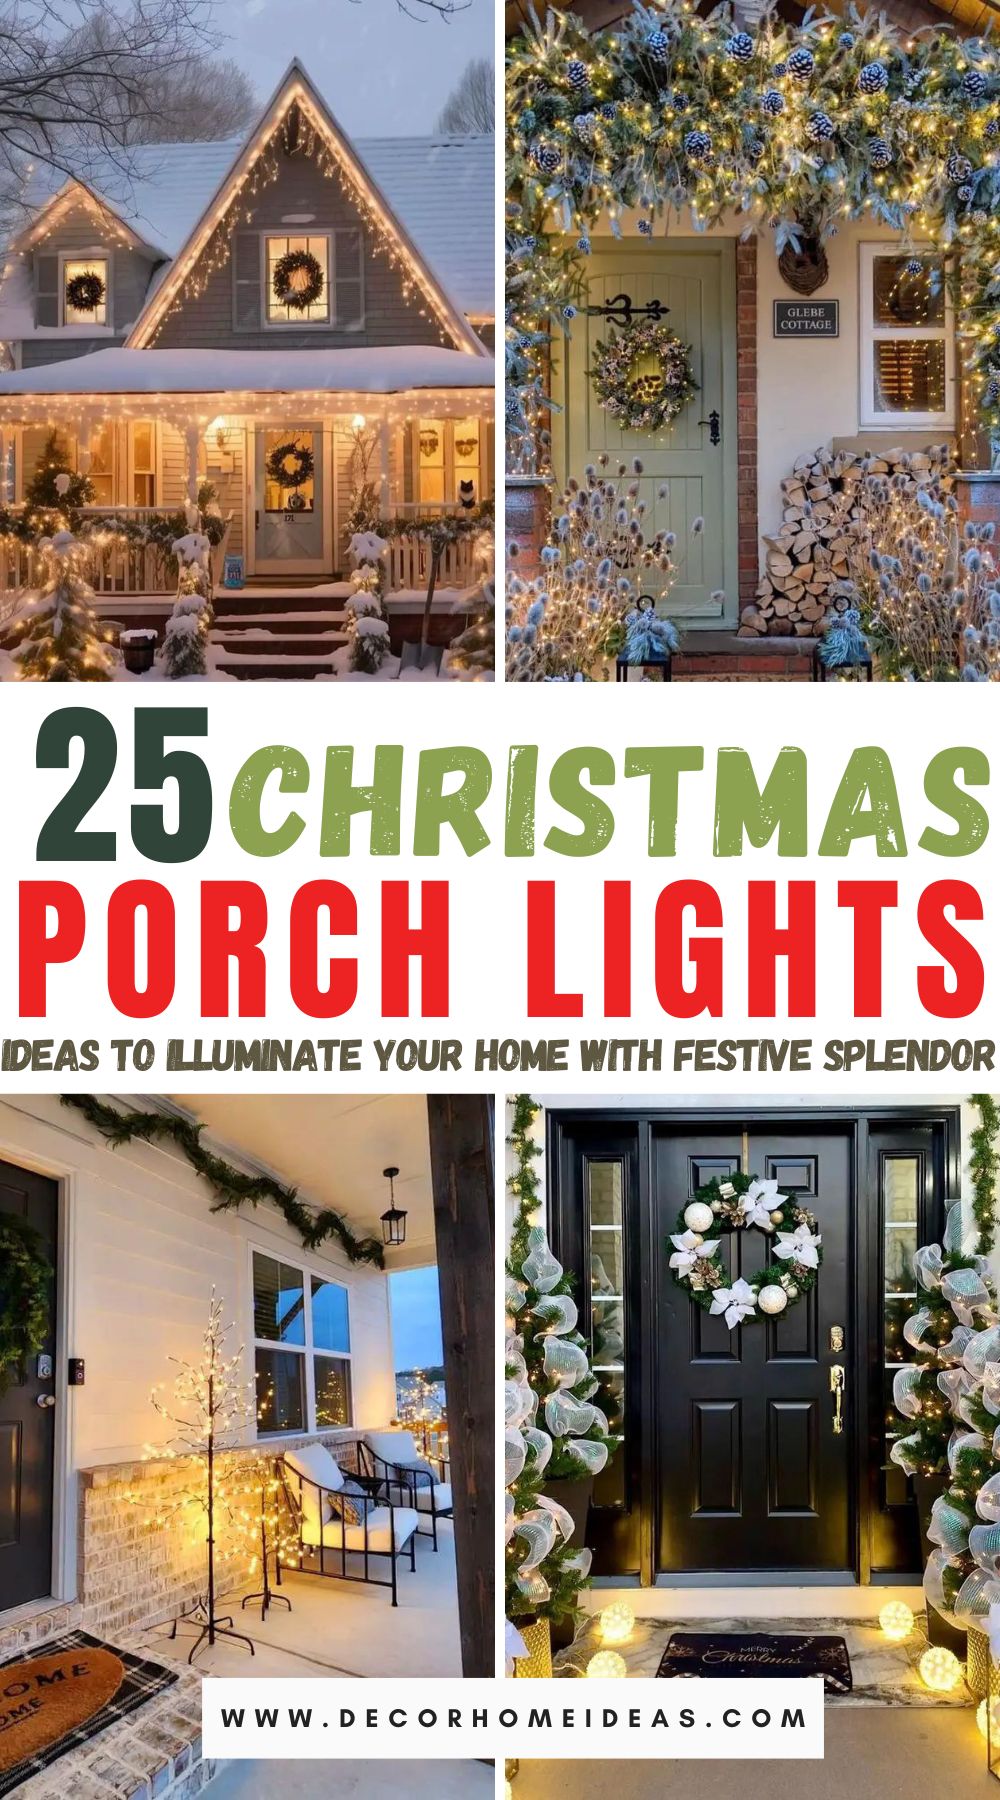 Discover 25 enchanting porch Christmas lights ideas to illuminate your home with festive splendor and create a warm and inviting holiday ambiance.